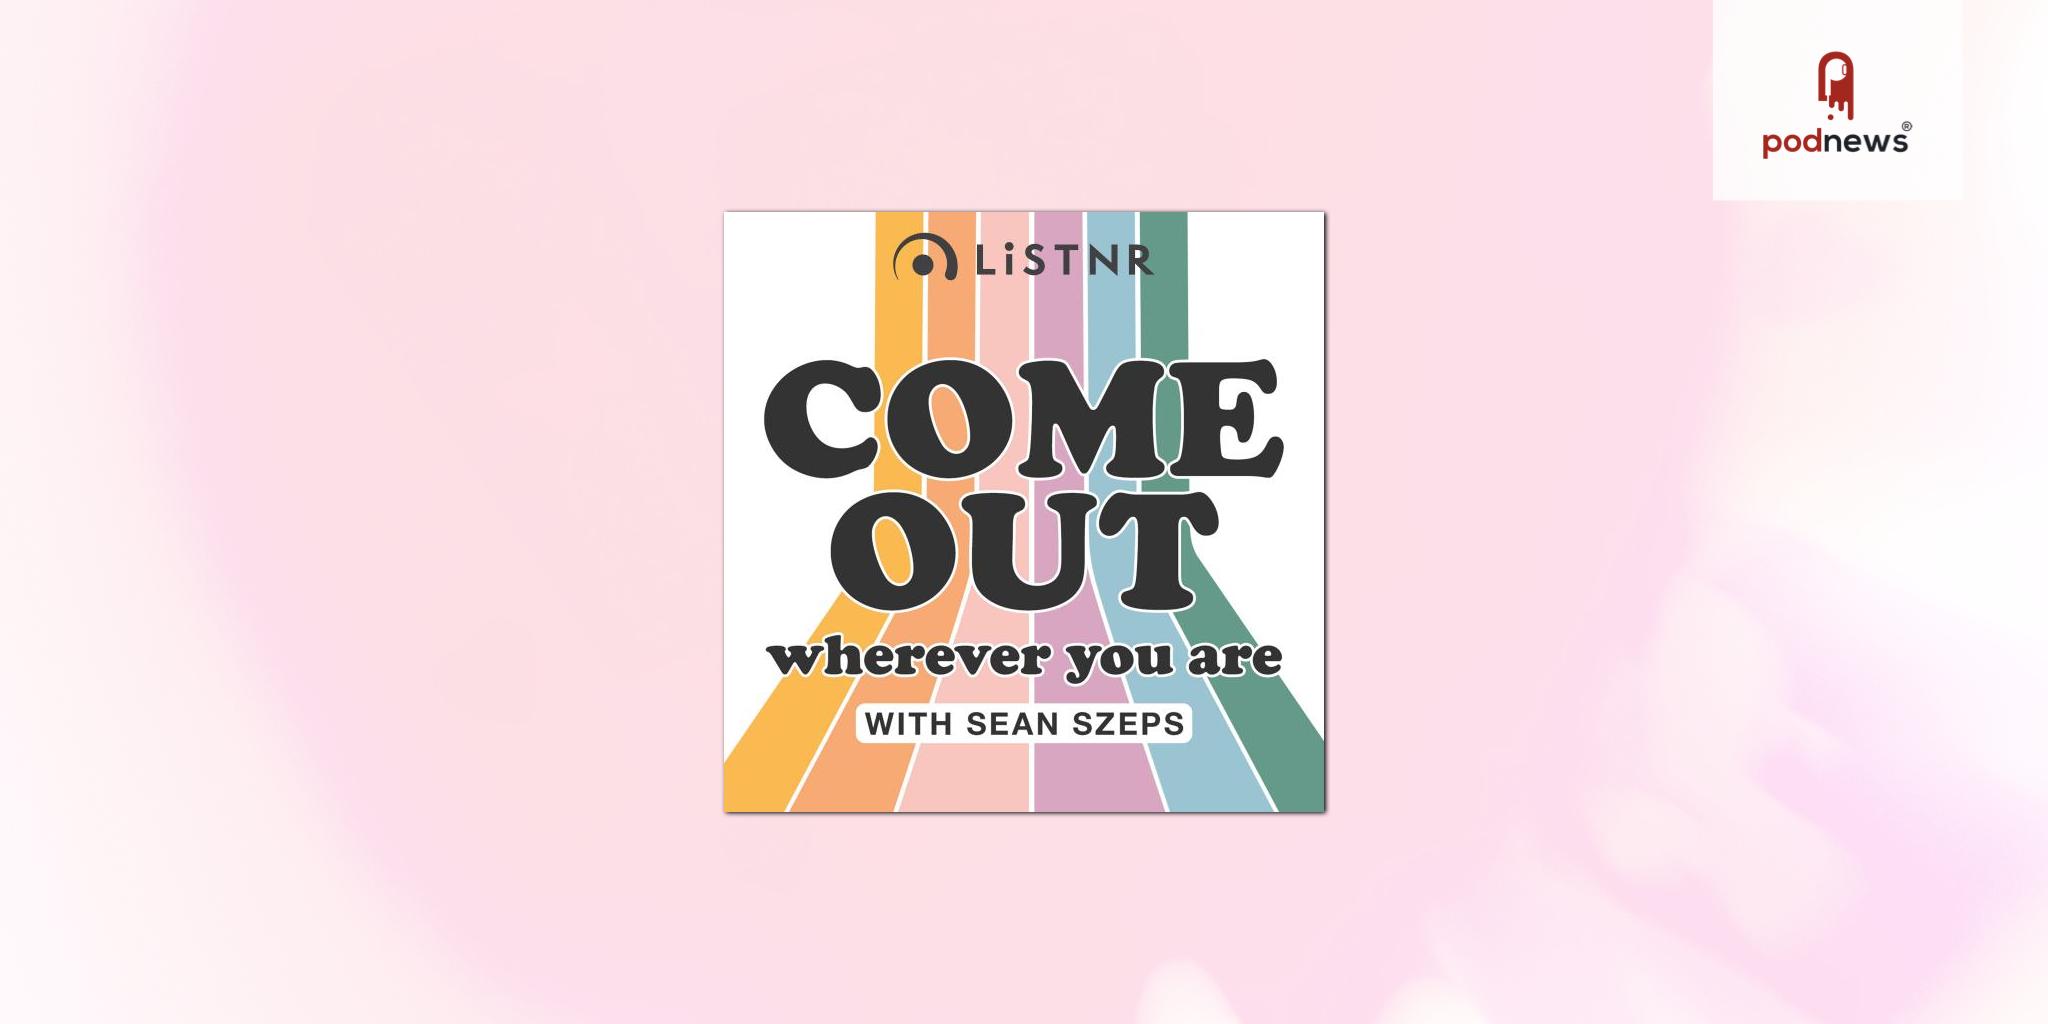 New podcast Come Out Wherever You Are launches during Pride Month